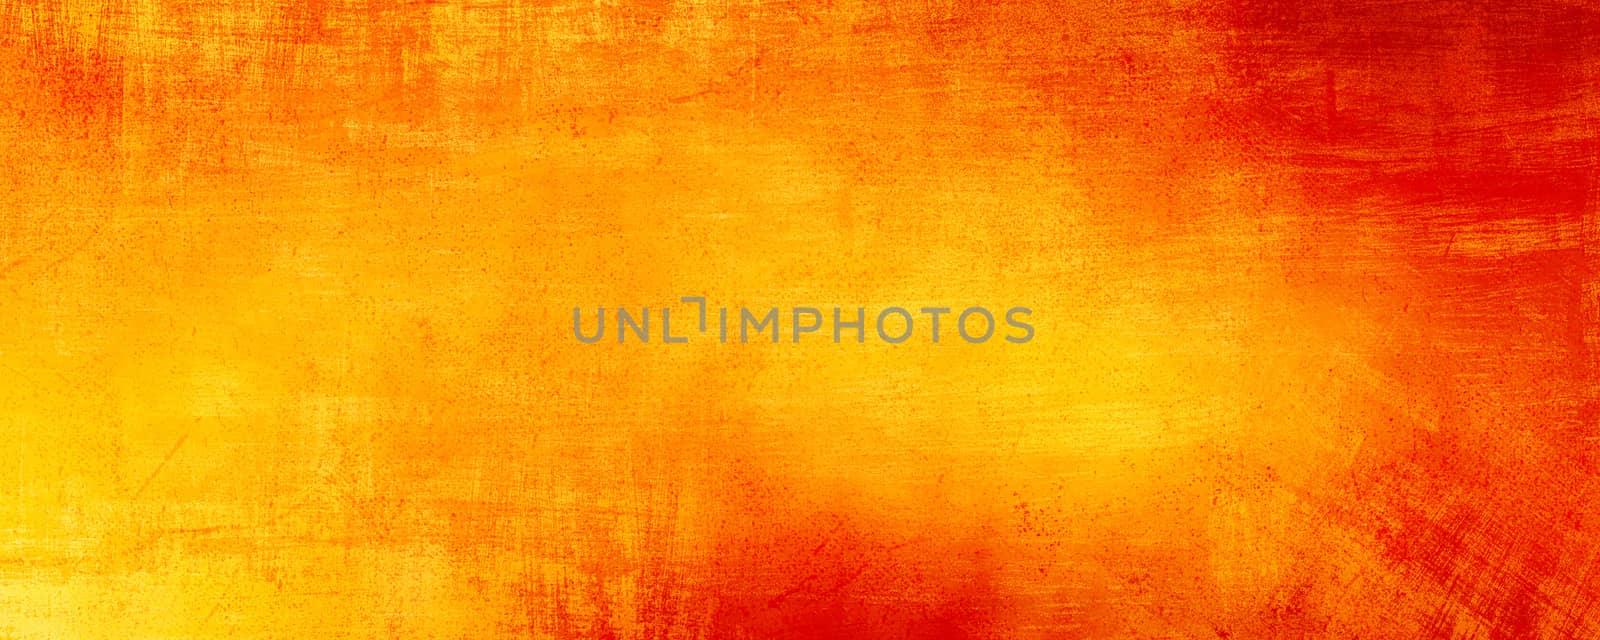 Abstract red gold Background texture with distressed, grunge wat by anlomaja